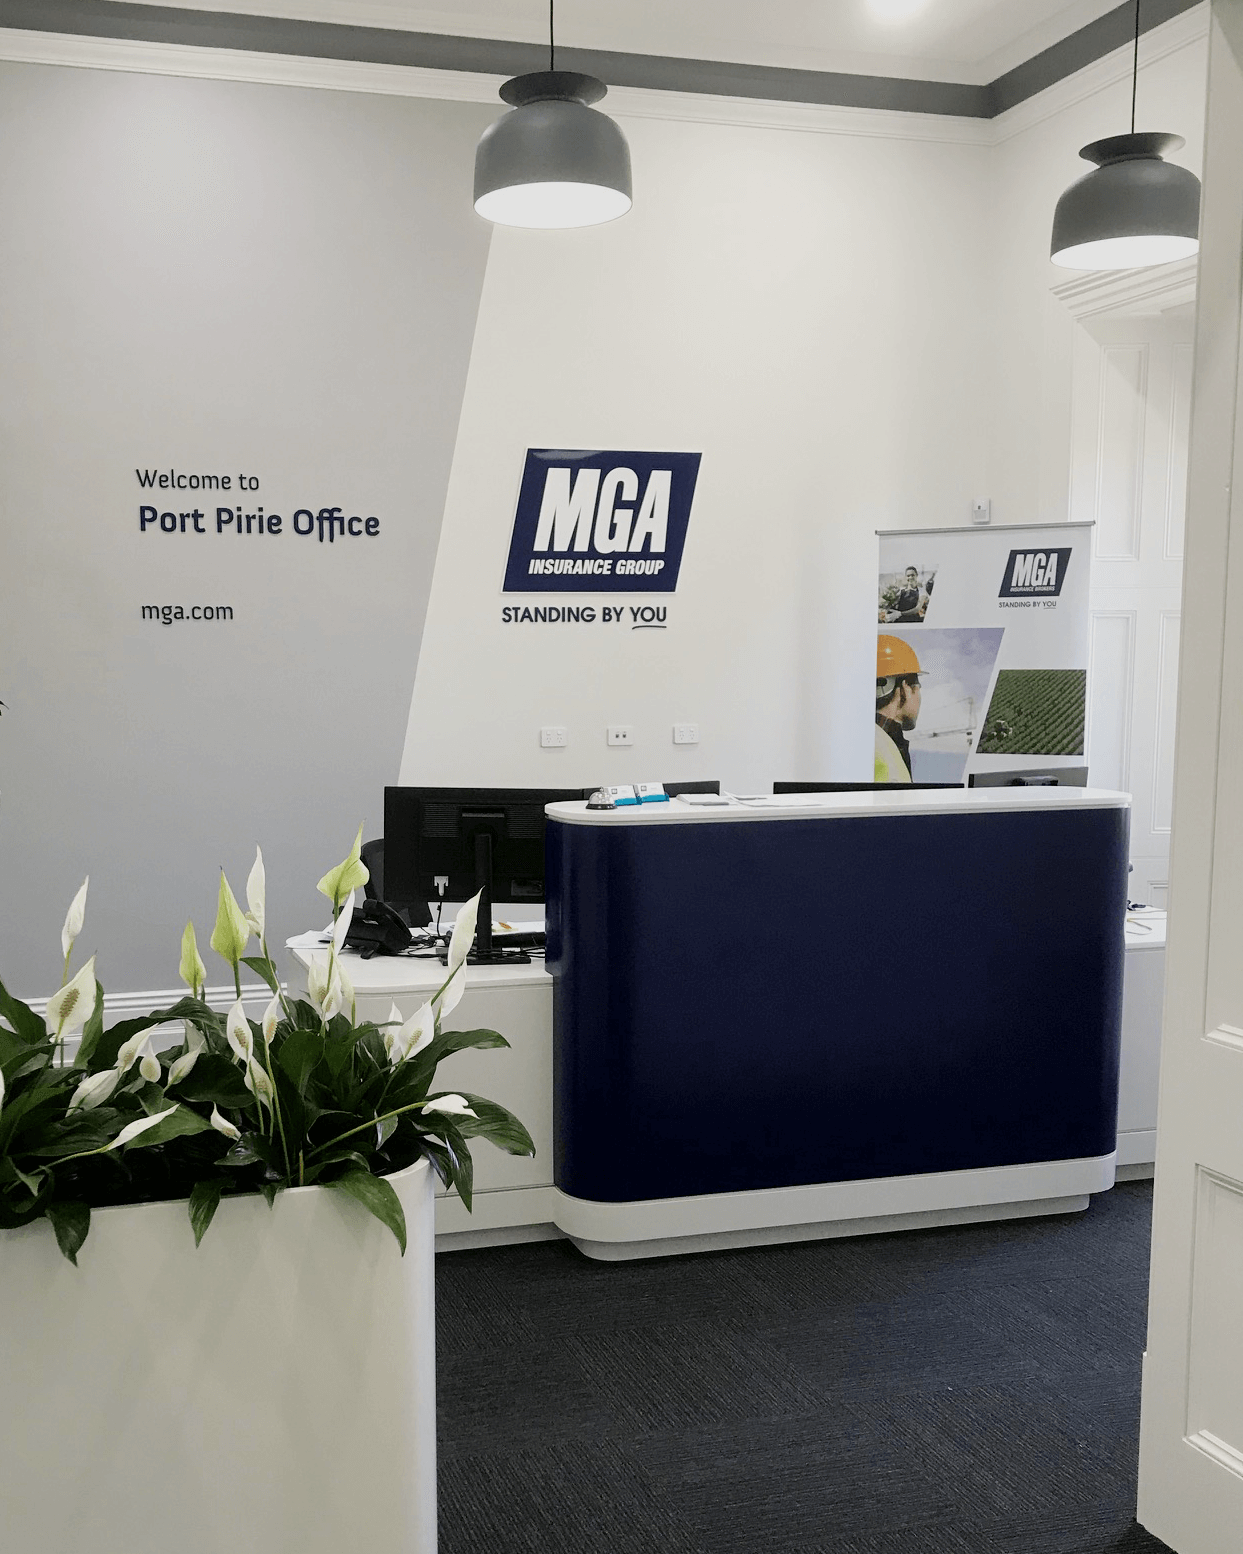 /projects/mga-insurance-group/Adelaide-Graphic-Designers-MGA-Port-Pirie.png